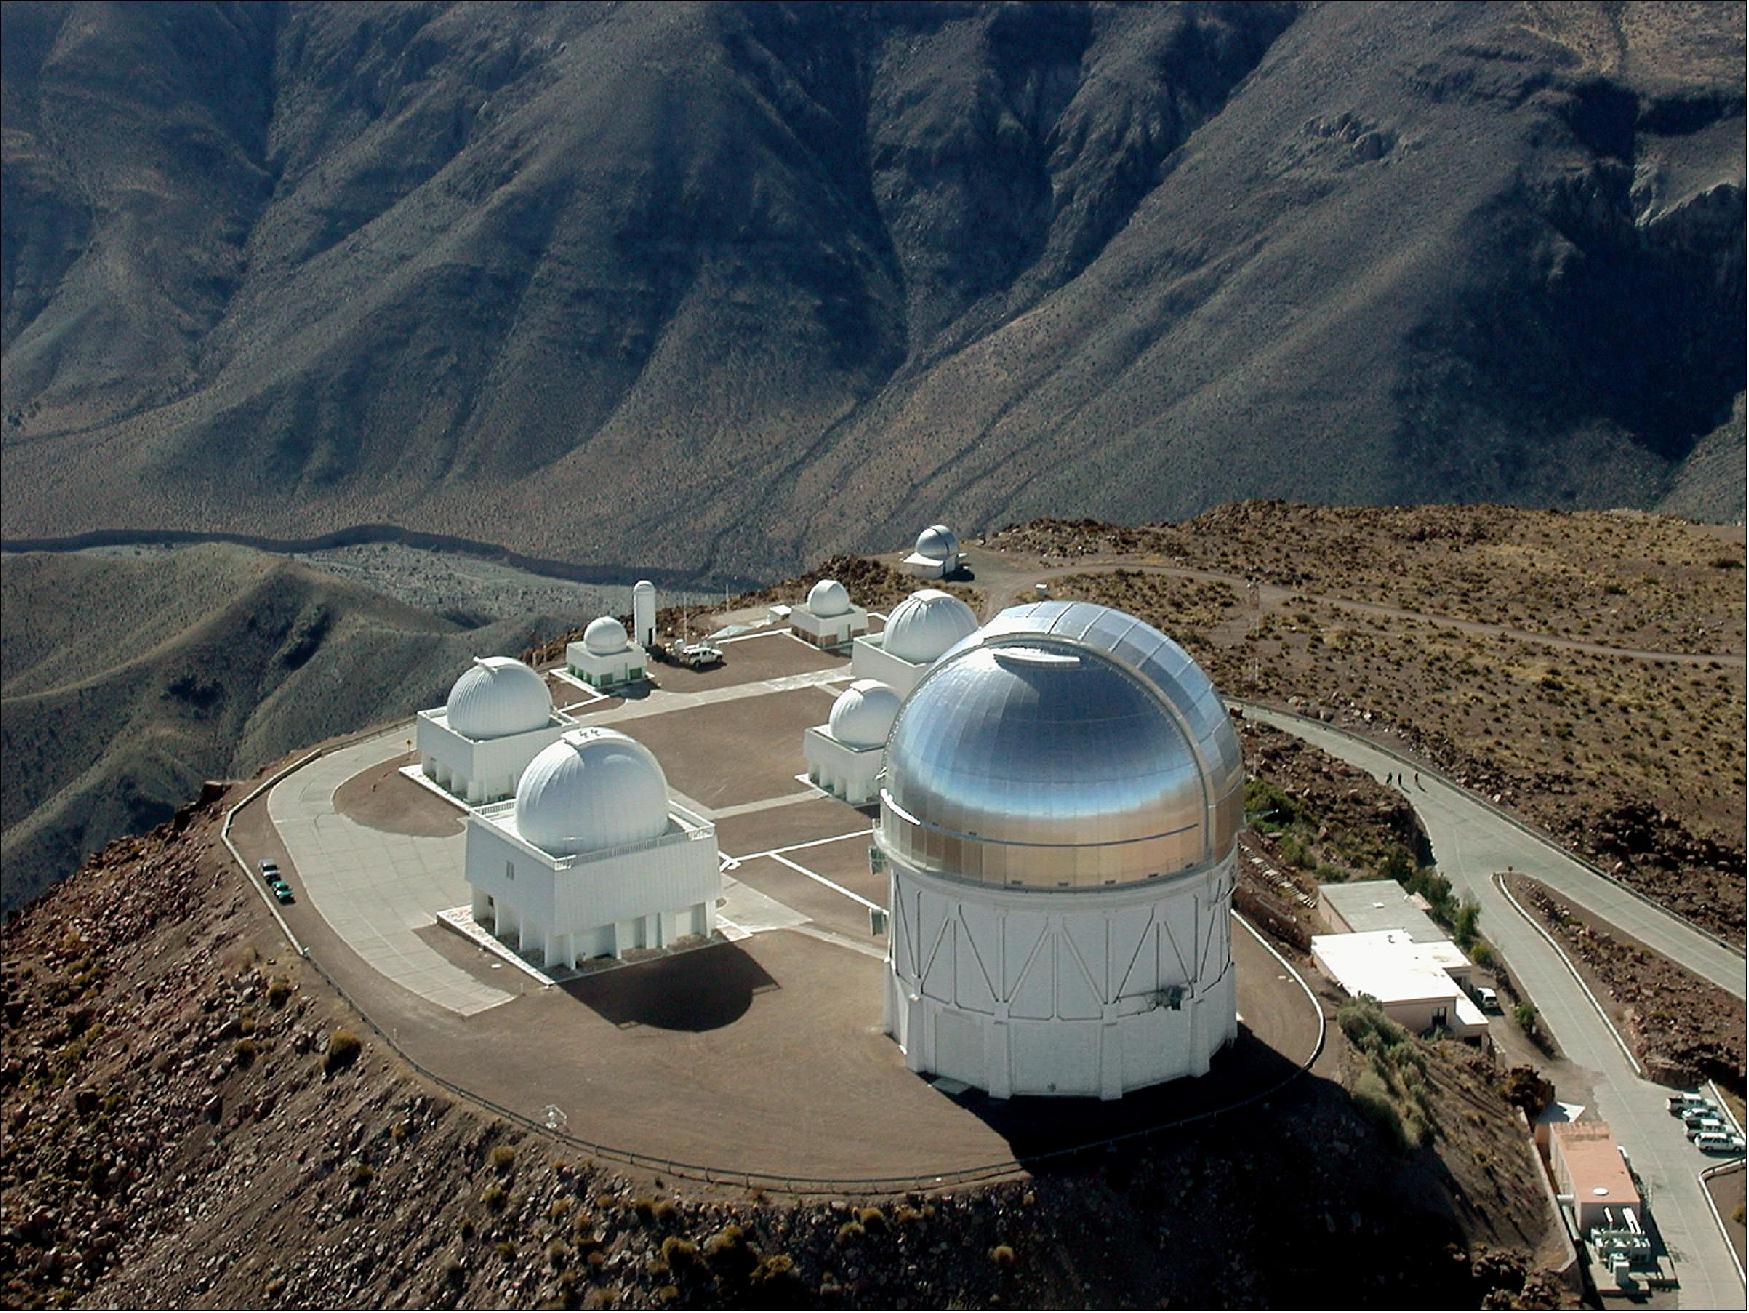 Figure 2: An aerial image of the Cerro Tololo Interamerican Observatory in Chile, with the silvery dome of the 4-meter Blanco telescope pictured at lower right (image credit: NOAO/AURA/NSF)